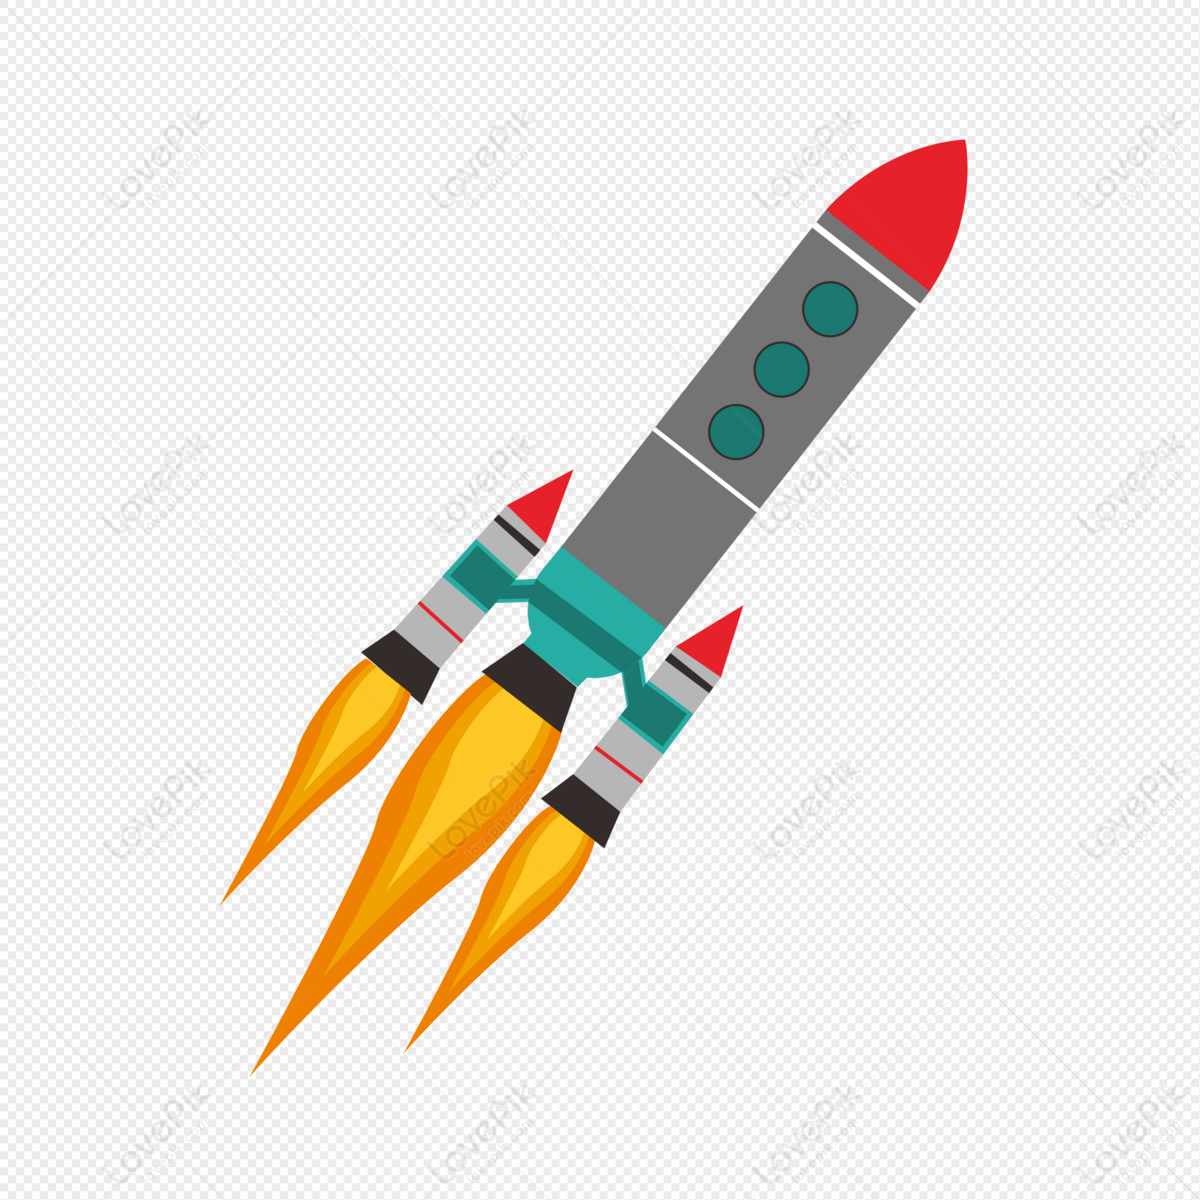 Cartoon Space Rocket Launch PNG Transparent Background And Clipart Image  For Free Download - Lovepik | 401533690